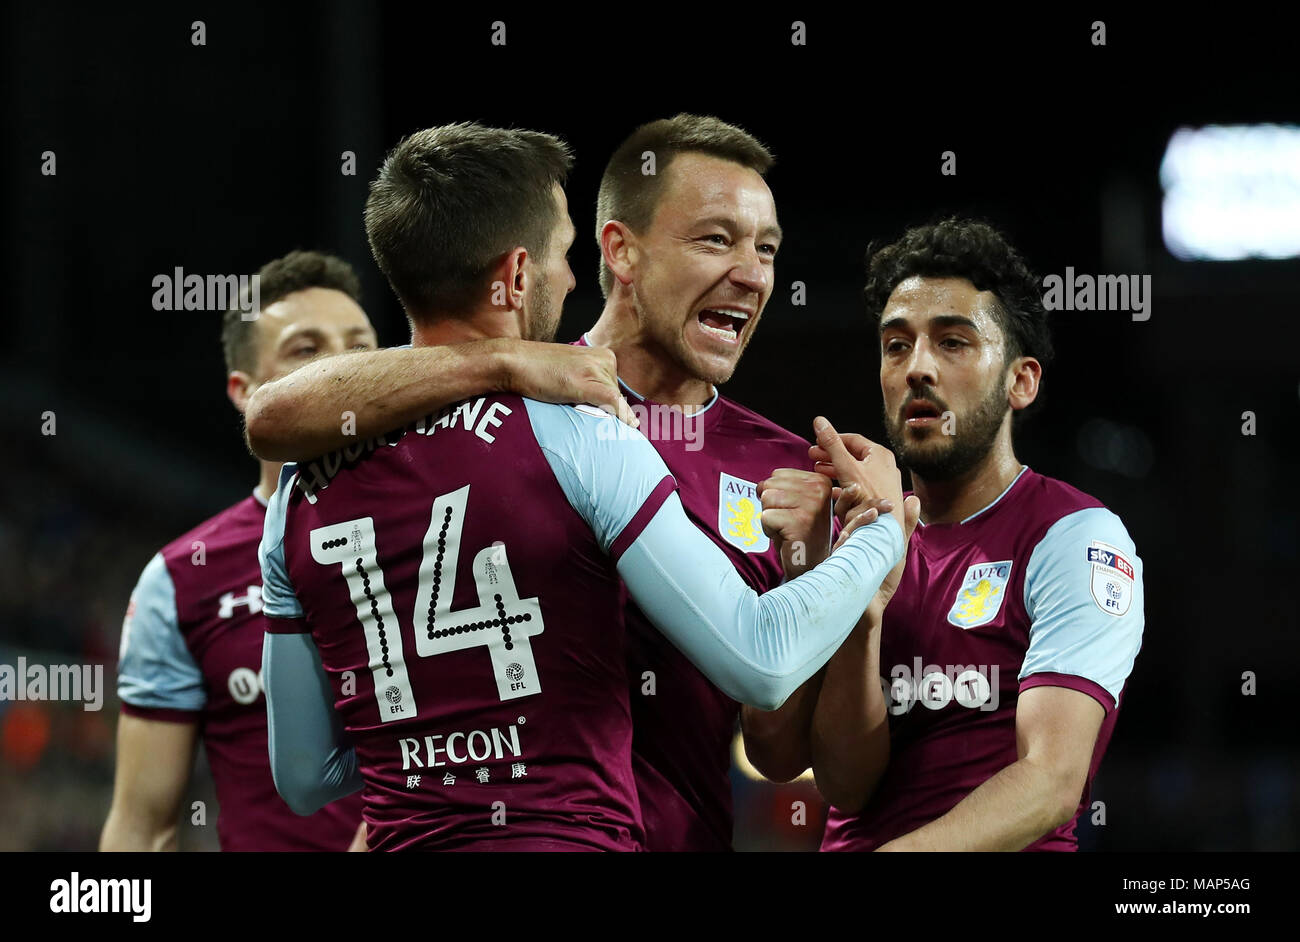 Aston Villa's Conor Hourihane (left) celebrates scoring his side's second goal of the game with teammate John Terry during the Sky Bet Championship match at Villa Park, Birmingham. Stock Photo